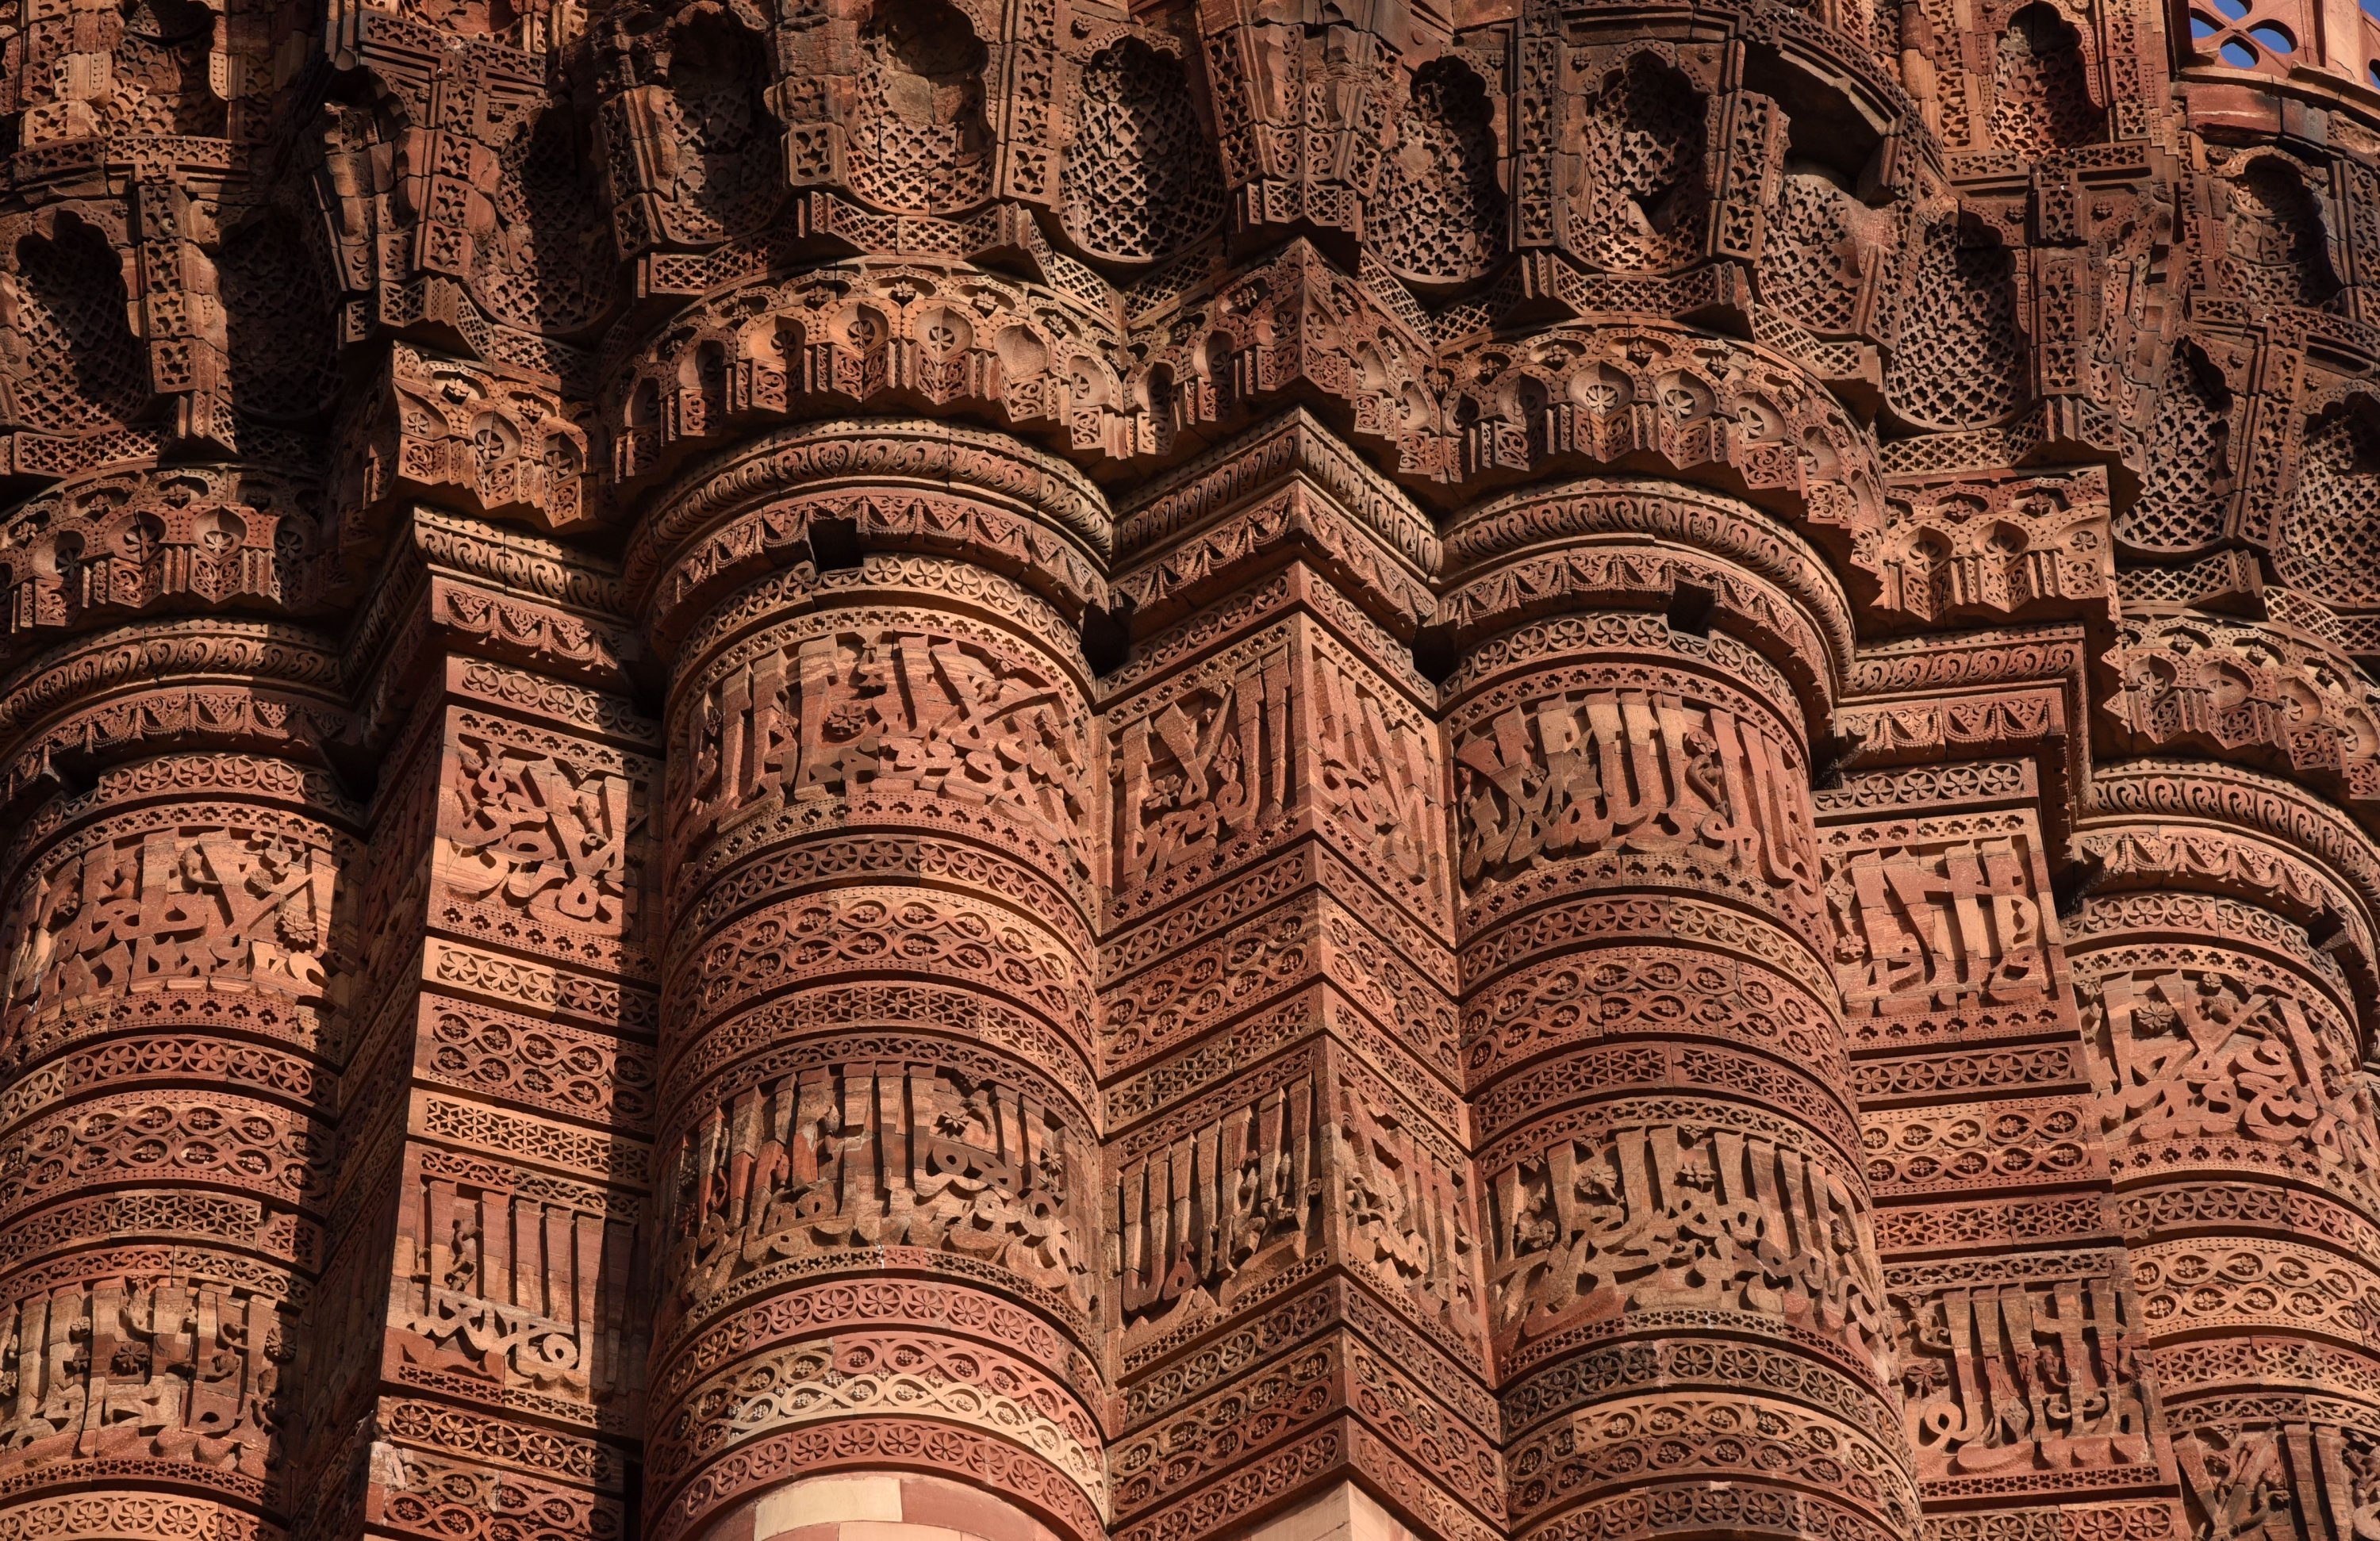 A close-up of details from the Qutub Minar in New Delhi, India, on Dec. 18, 2020. (AA PHOTO)